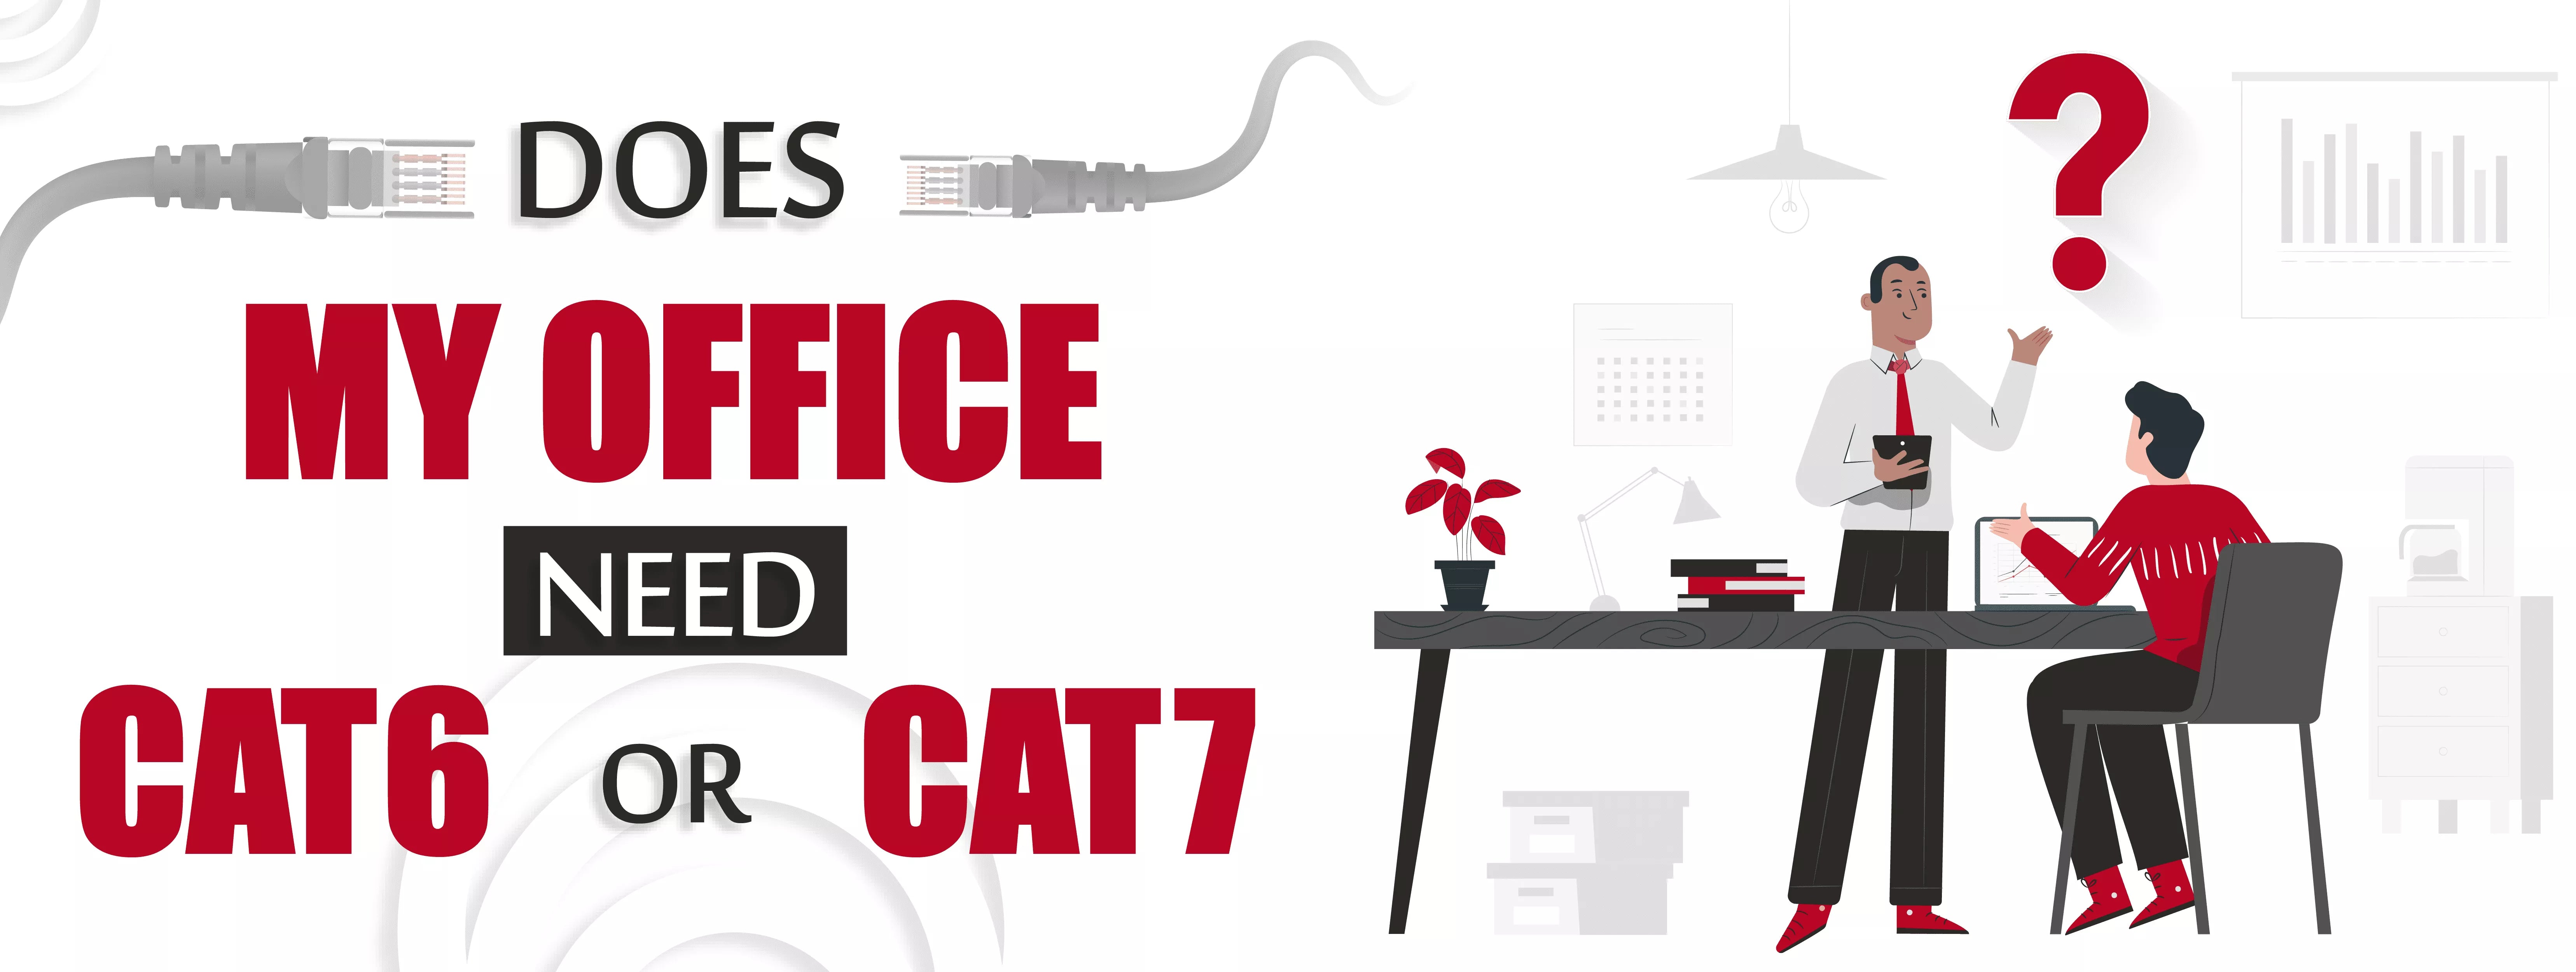 Does My Office Need Cat6 Or Cat7 Cabling? - Delco Cables